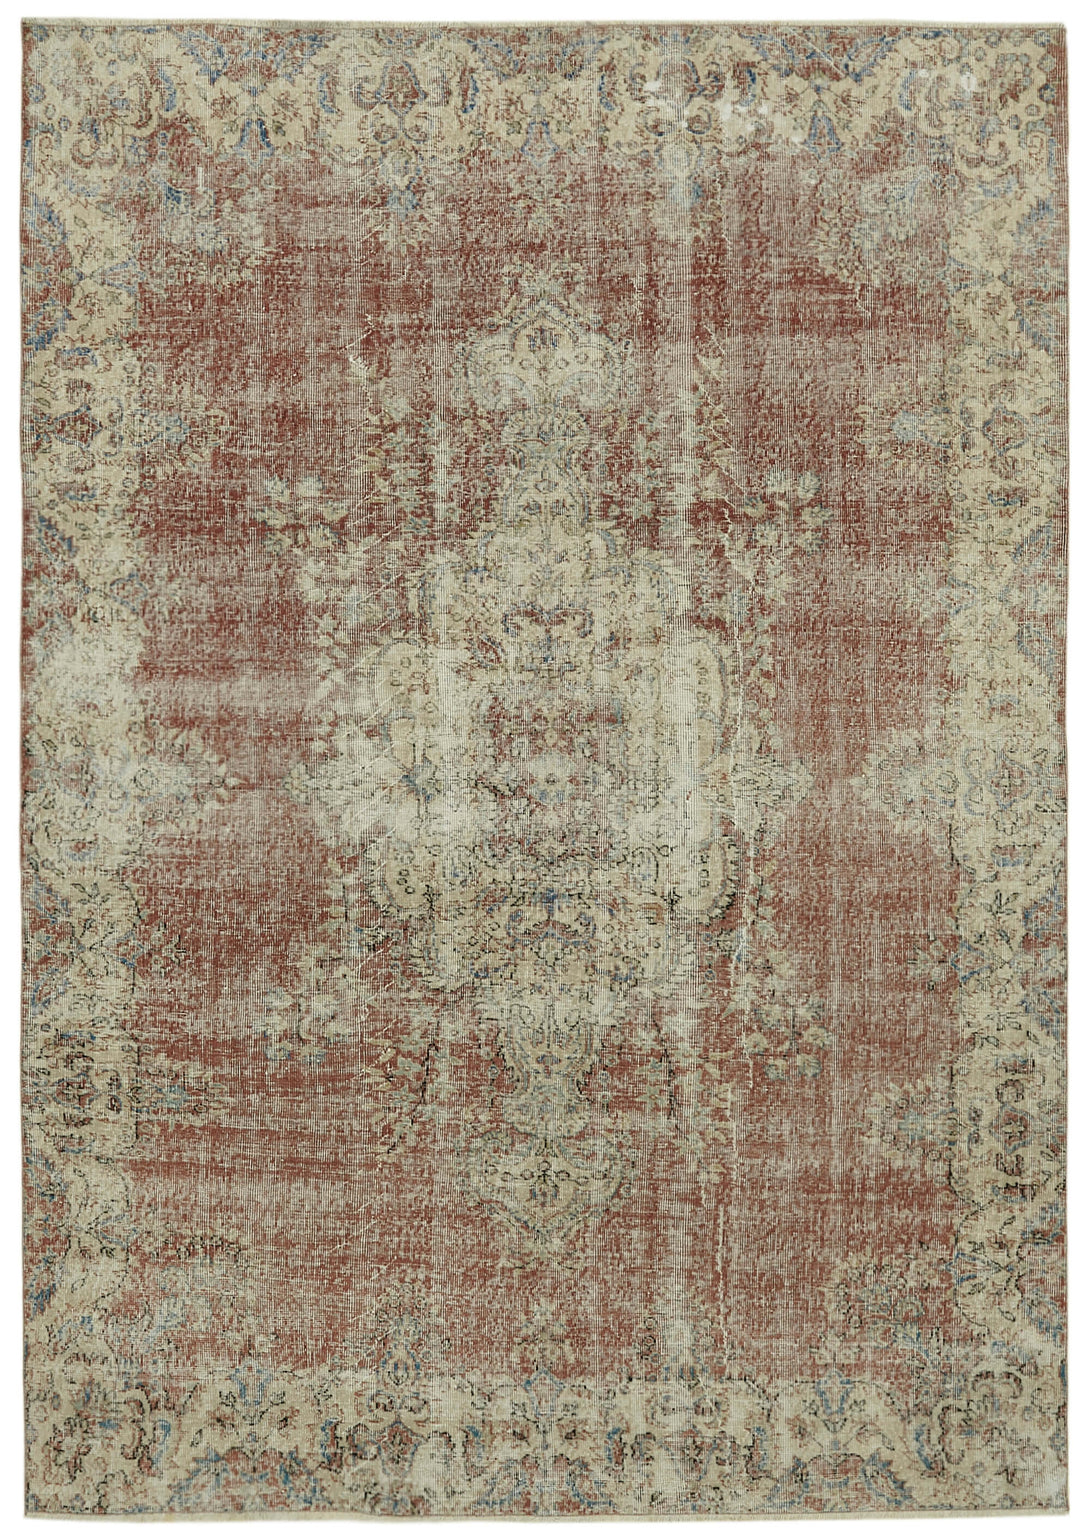 Handmade White Wash Area Rug > Design# OL-AC-41740 > Size: 6'-10" x 9'-7", Carpet Culture Rugs, Handmade Rugs, NYC Rugs, New Rugs, Shop Rugs, Rug Store, Outlet Rugs, SoHo Rugs, Rugs in USA